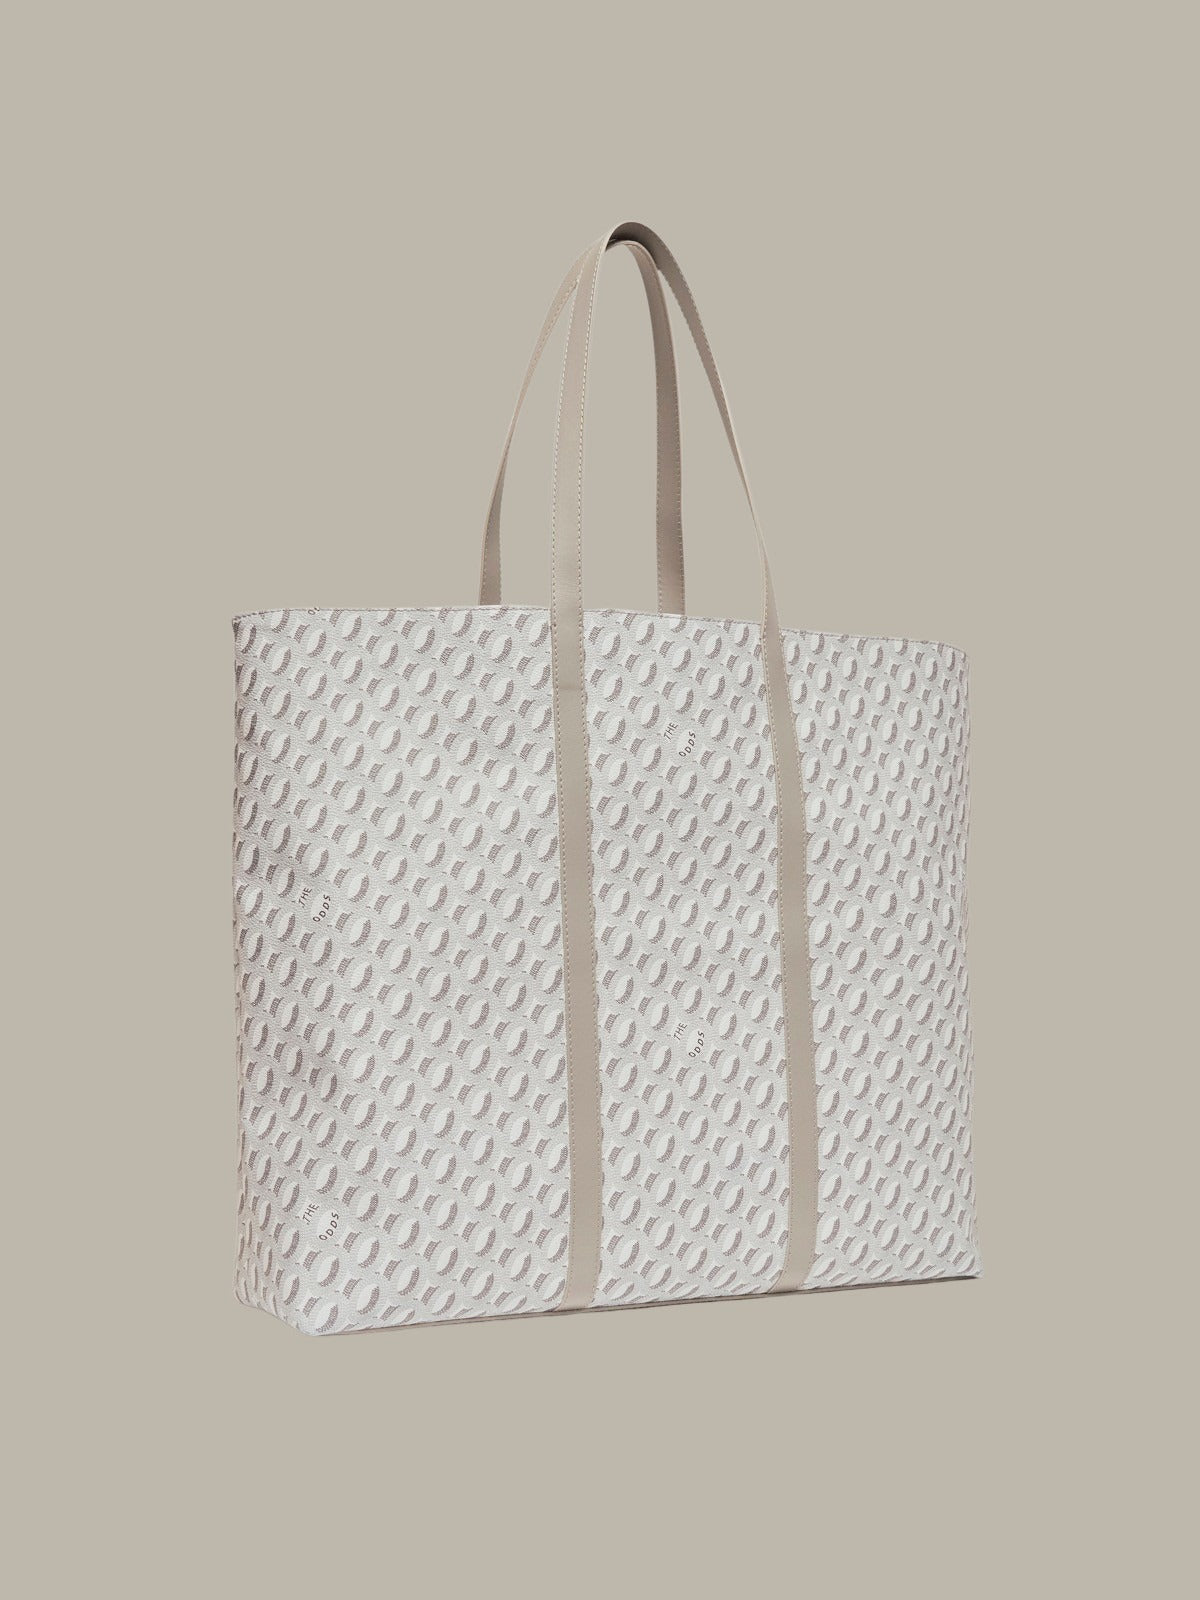 Totes Odd Tote Bag Marble White-Grey/ LMTD edition